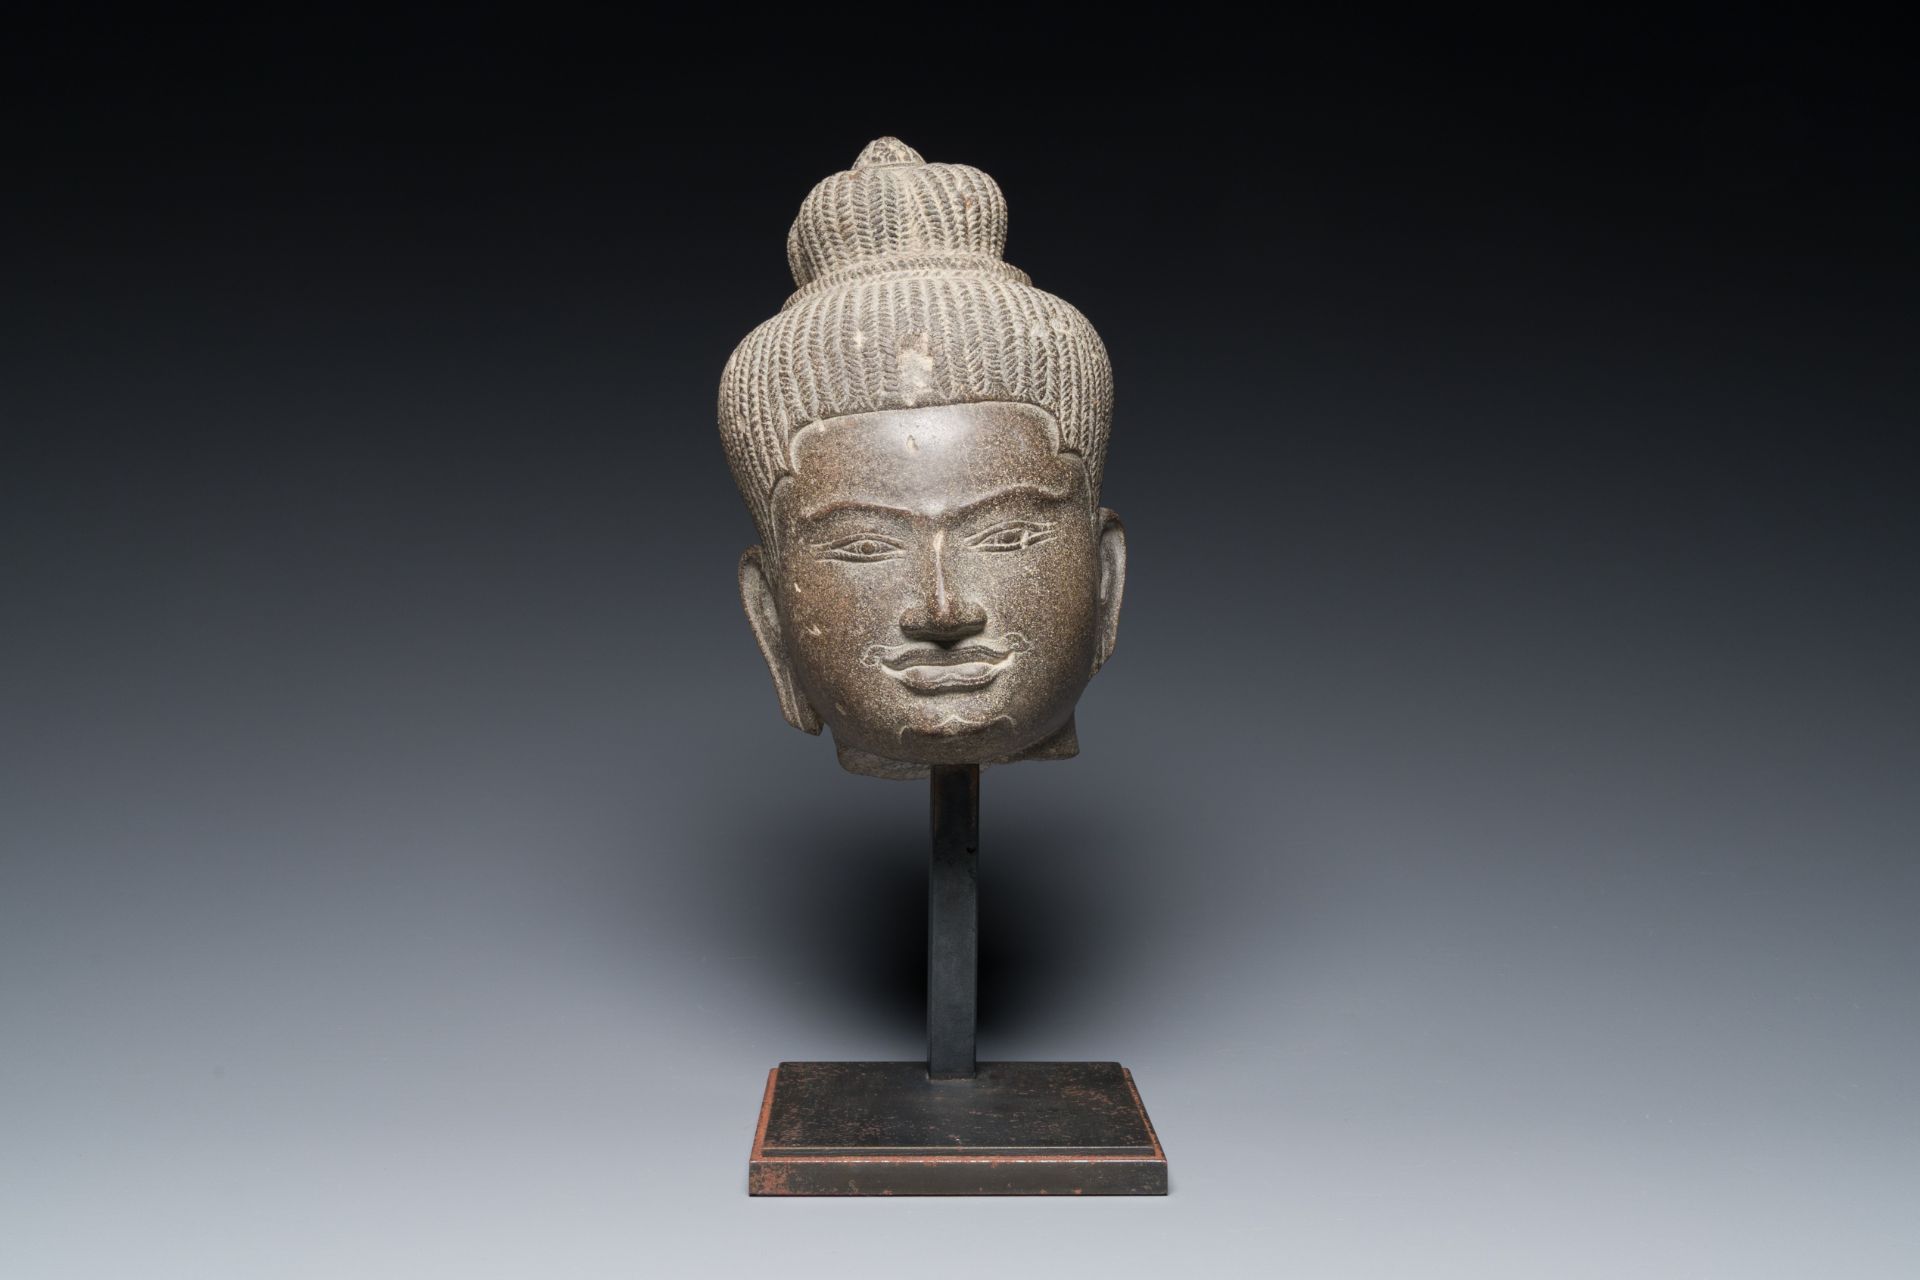 A Khmer polished sandstone head of Uma in Baphuon-style, Angkor period, Cambodia, 11th C. - Image 2 of 15